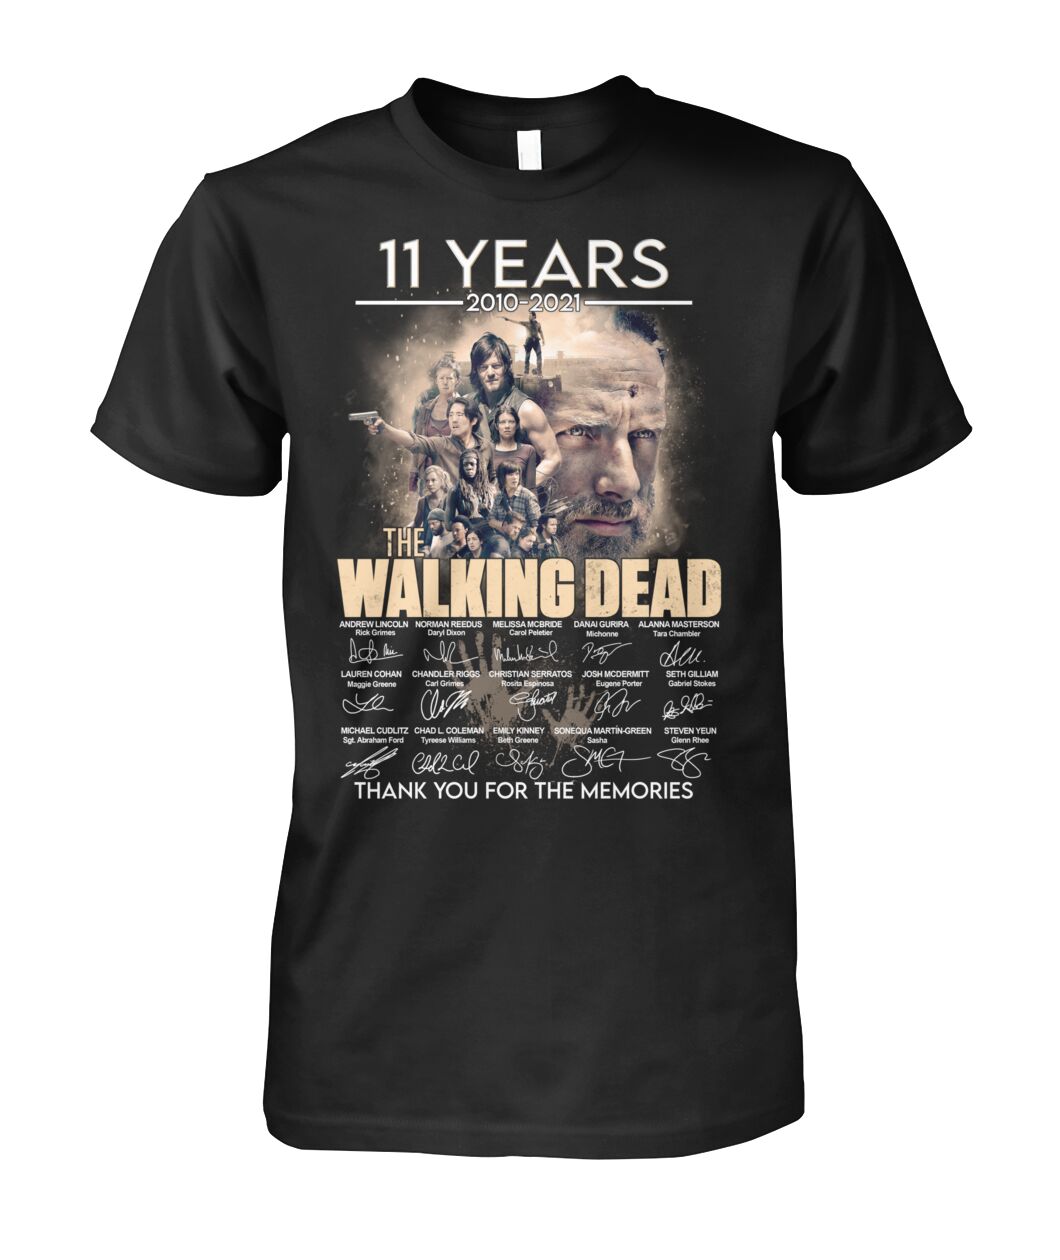 11 years The walking dead signature thank you for the memories shirt, sweatshirt and hoodie